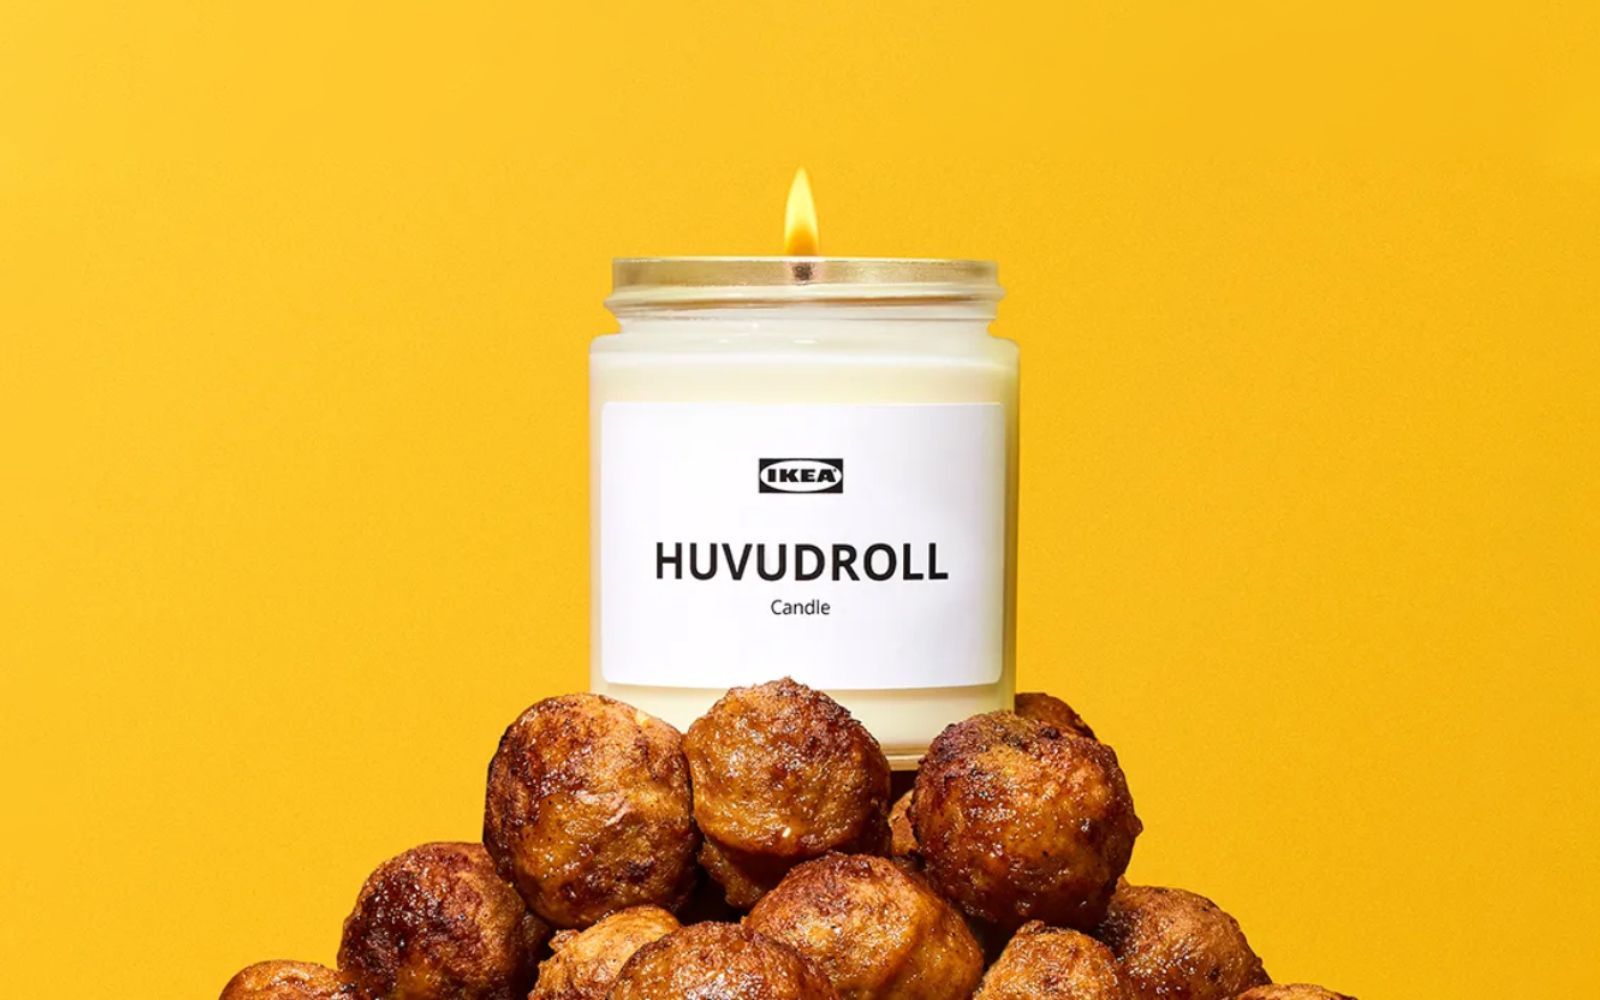 IKEA has created a meatball essence candle Yes, you read that correctly